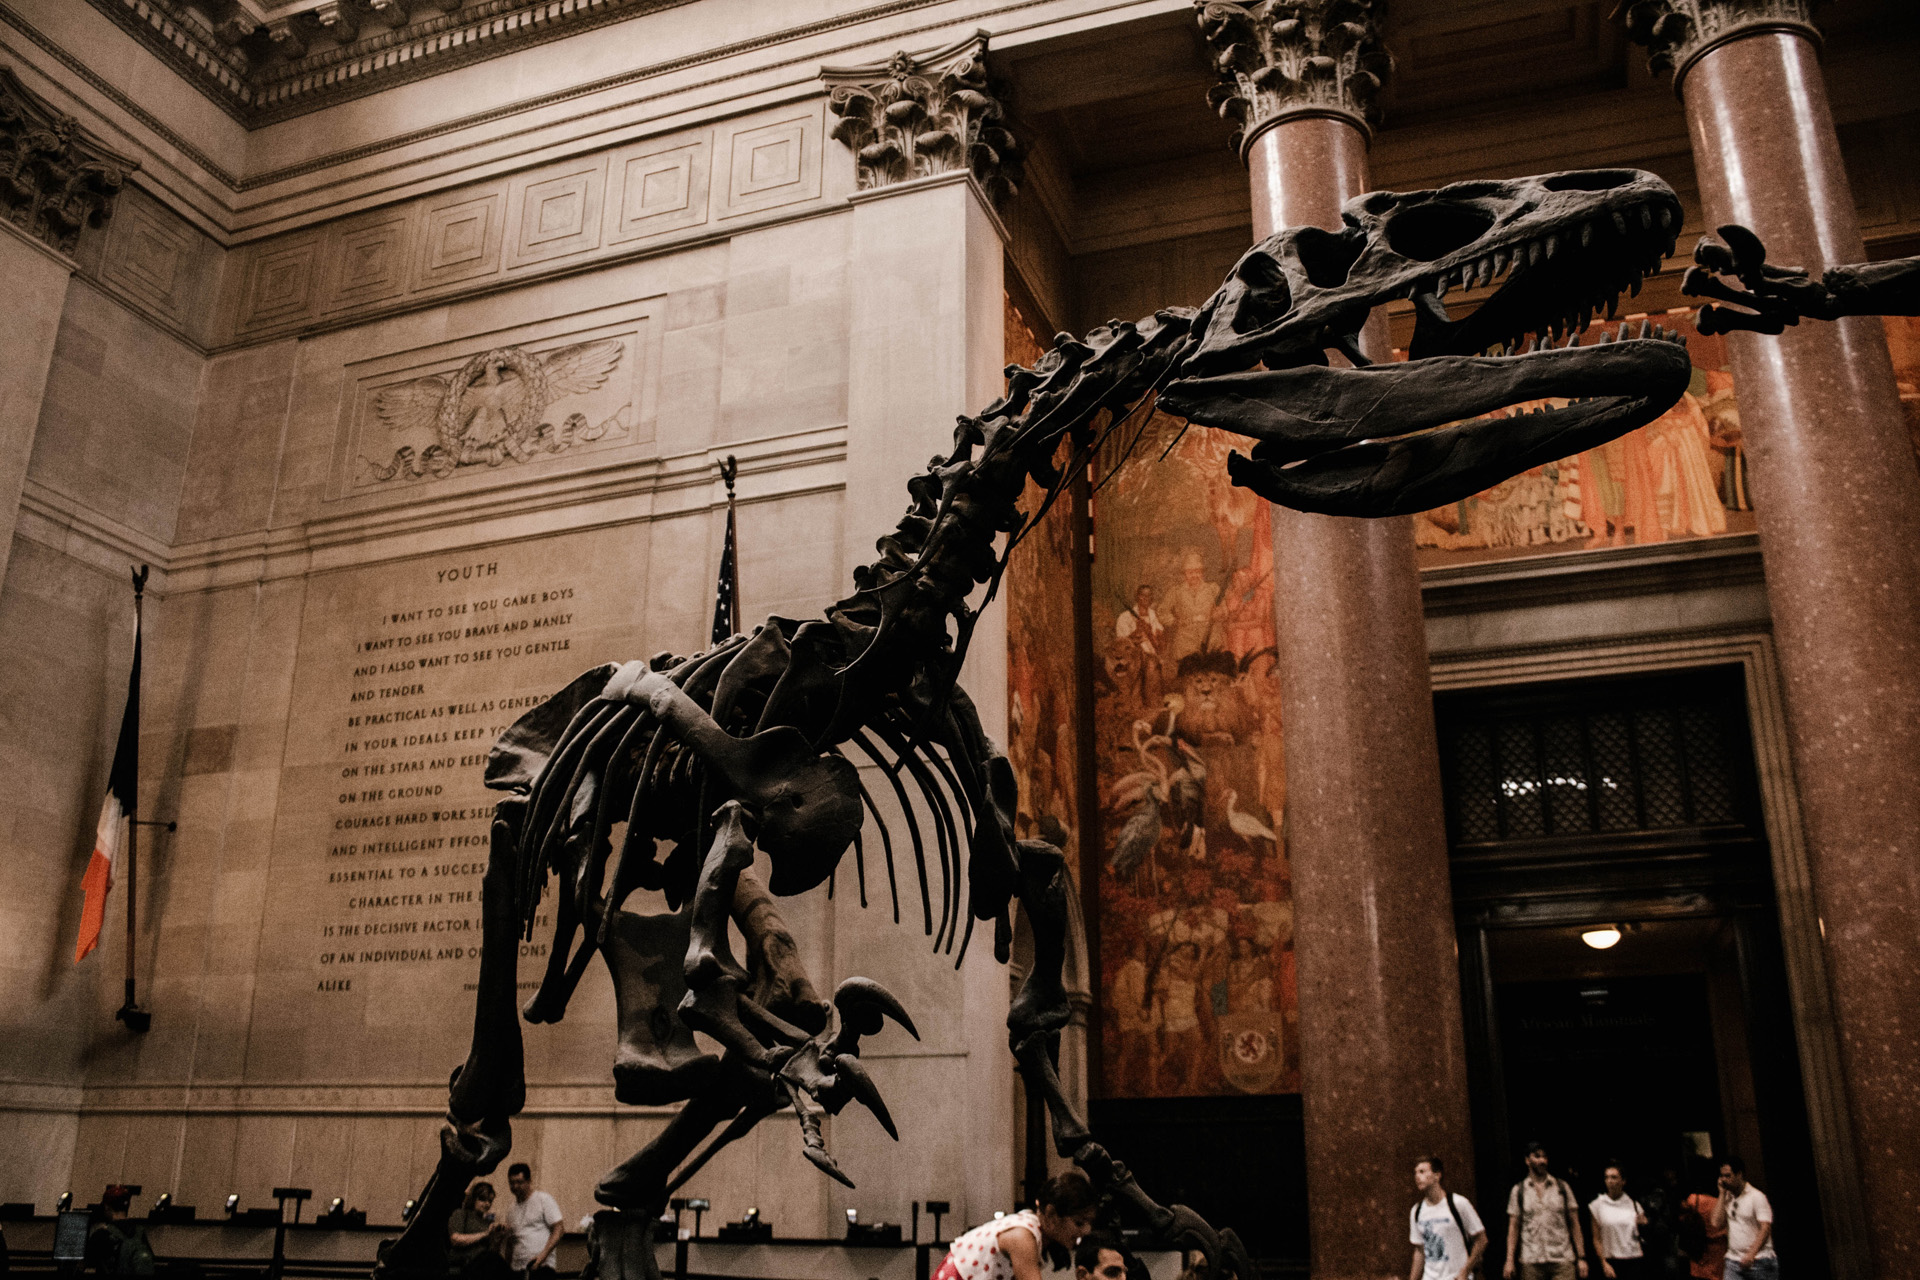 The dinosaur in the American Museum of Natural History